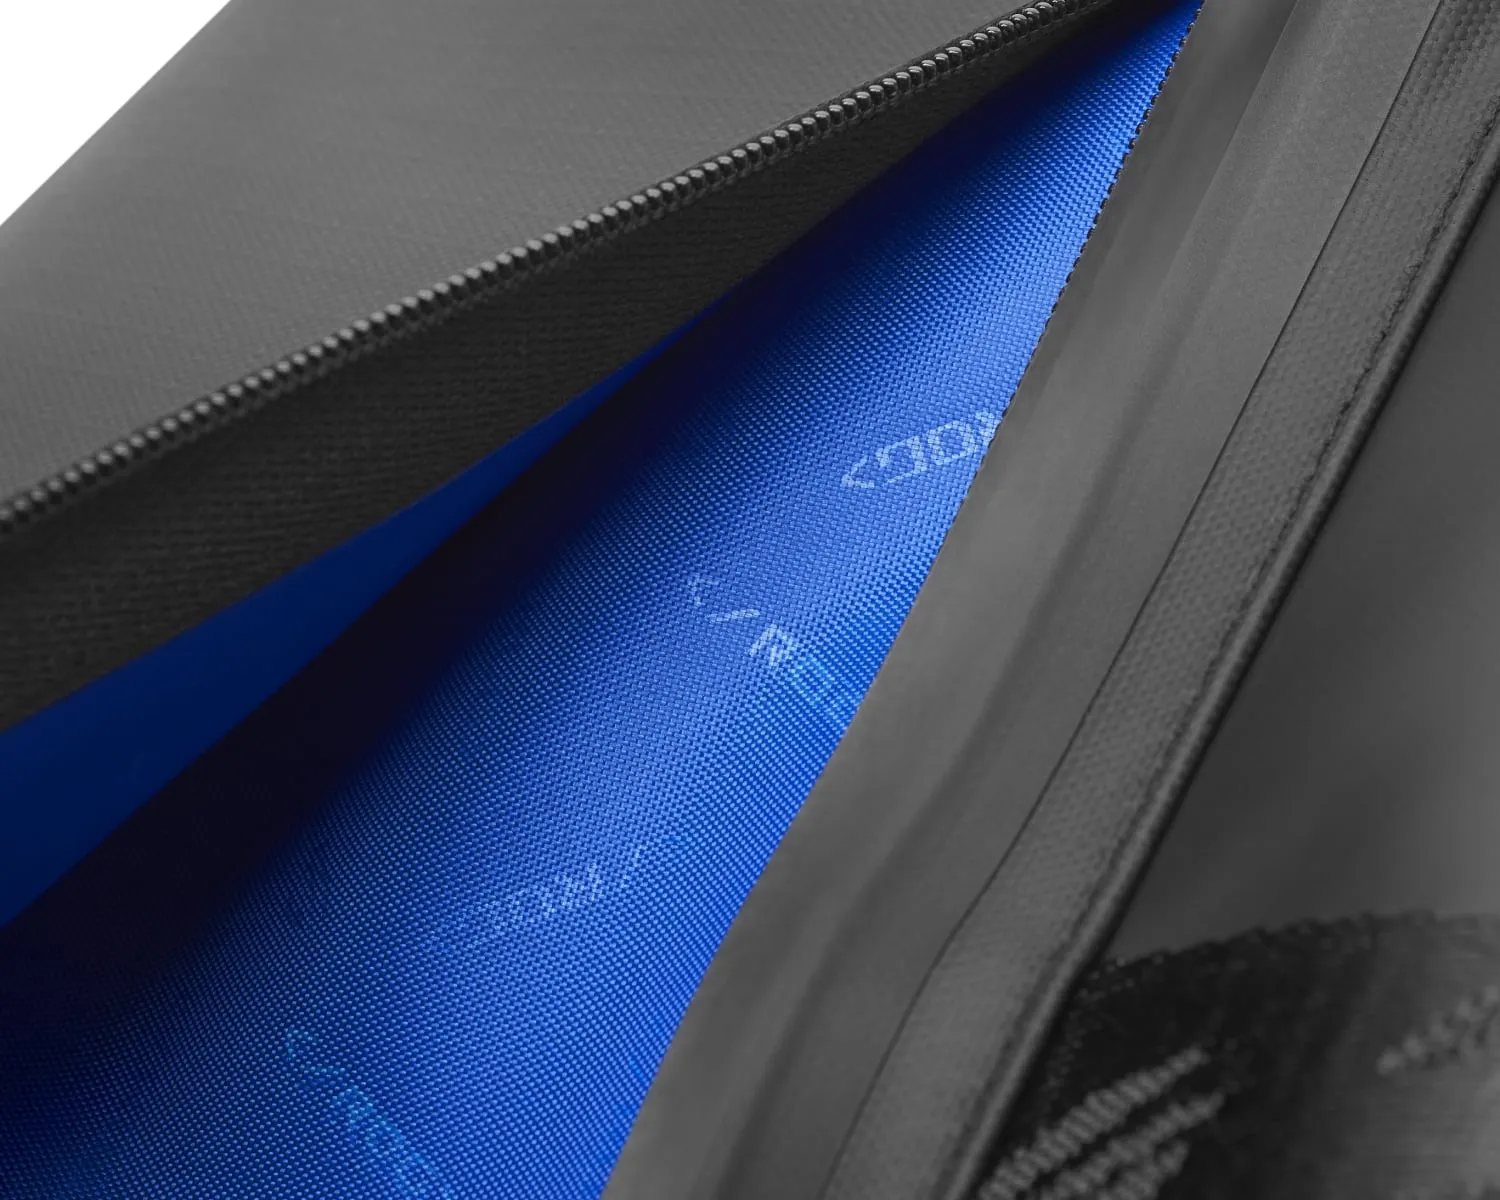 Extreme close-up of the interior stitching with the zipper opened on the ROG SLASH Sling Bag 2.0